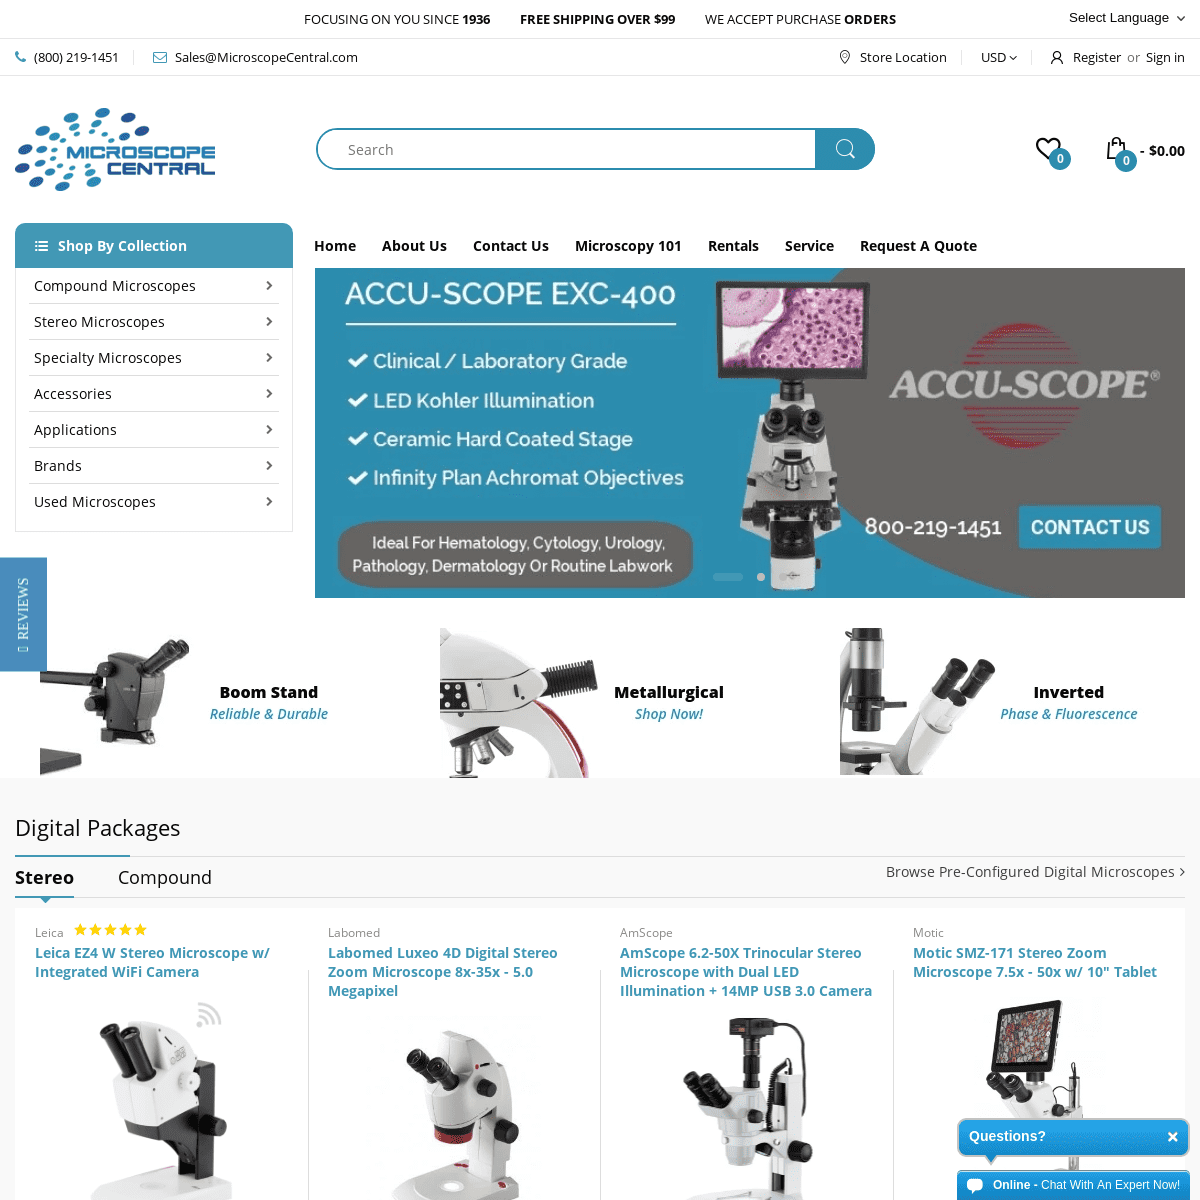 A complete backup of microscopecentral.com